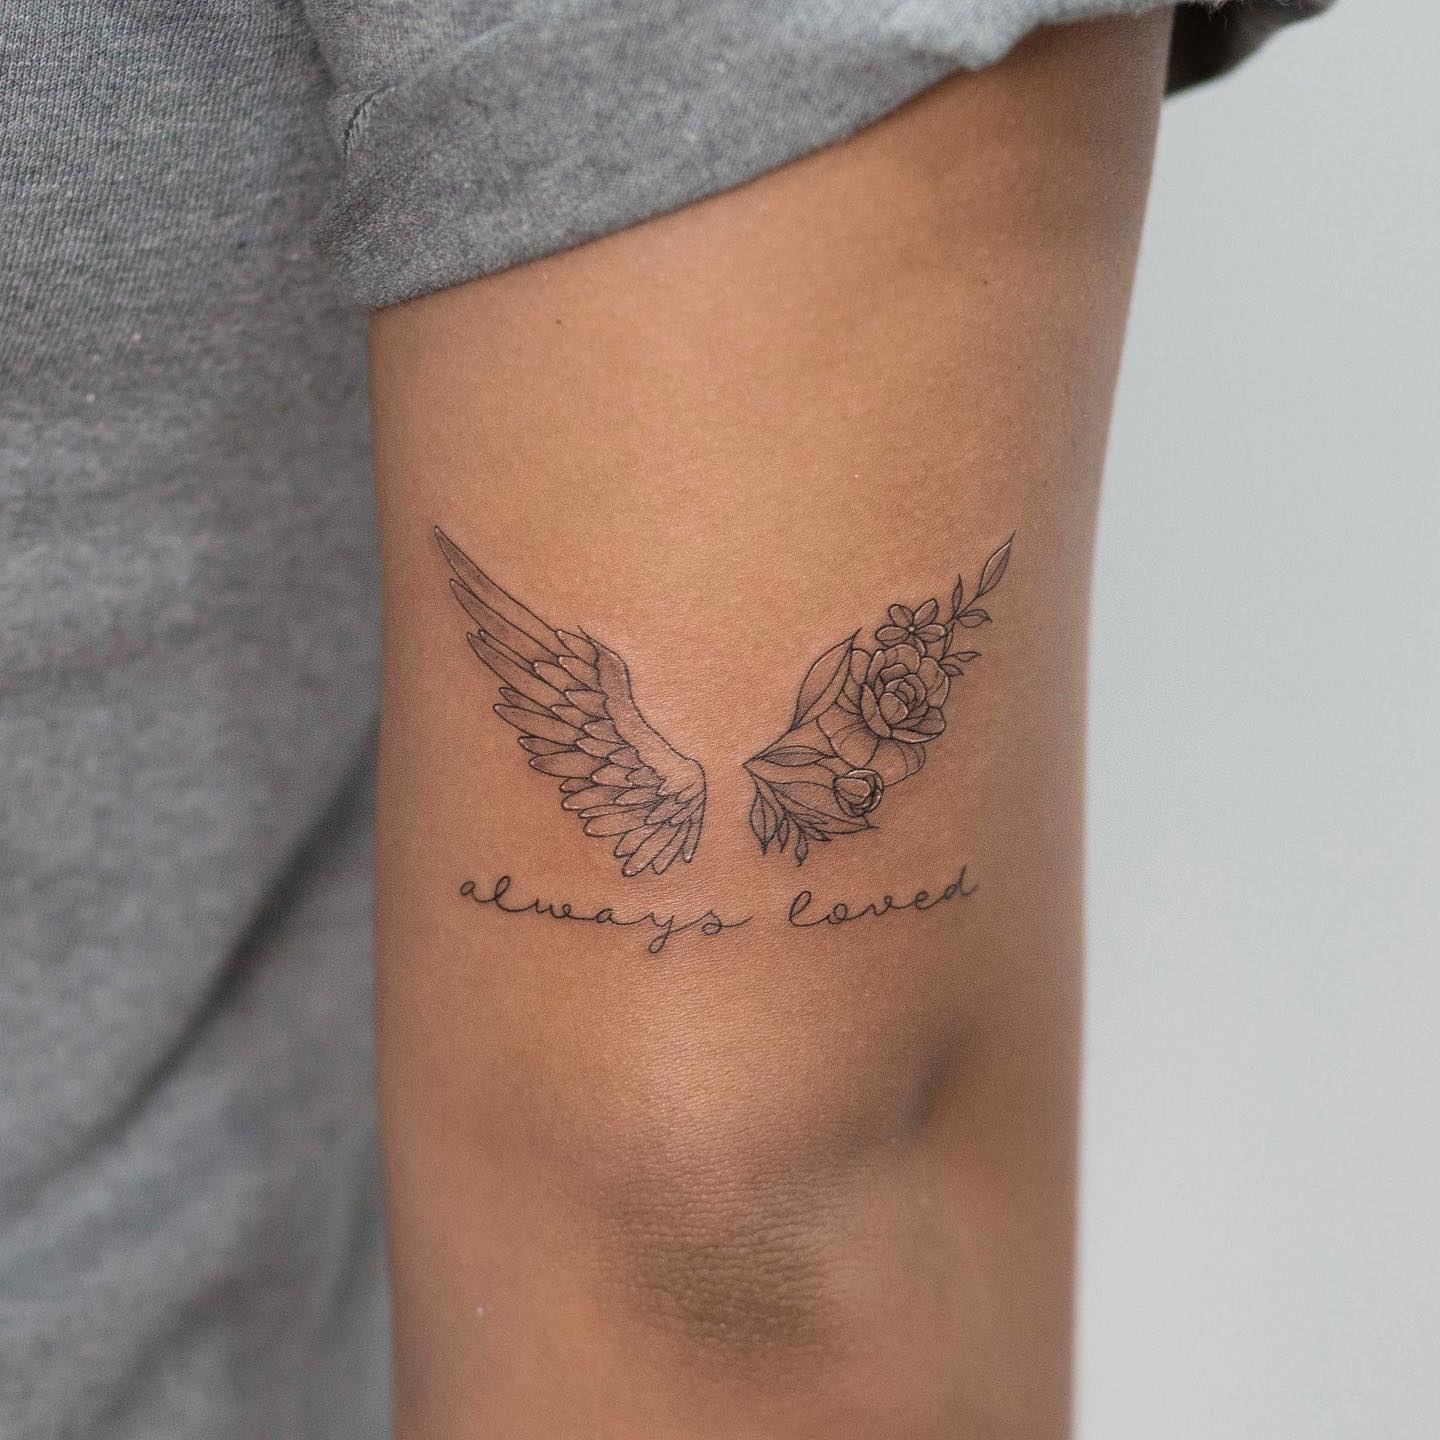 tattoo sticker 5pcs Creative Angel Wing Tattoo Sticker Girl Design  Waterproof Temporary DIY Arm Art Decal Tattoo Sticker : Buy Online at Best  Price in KSA - Souq is now Amazon.sa: Everything